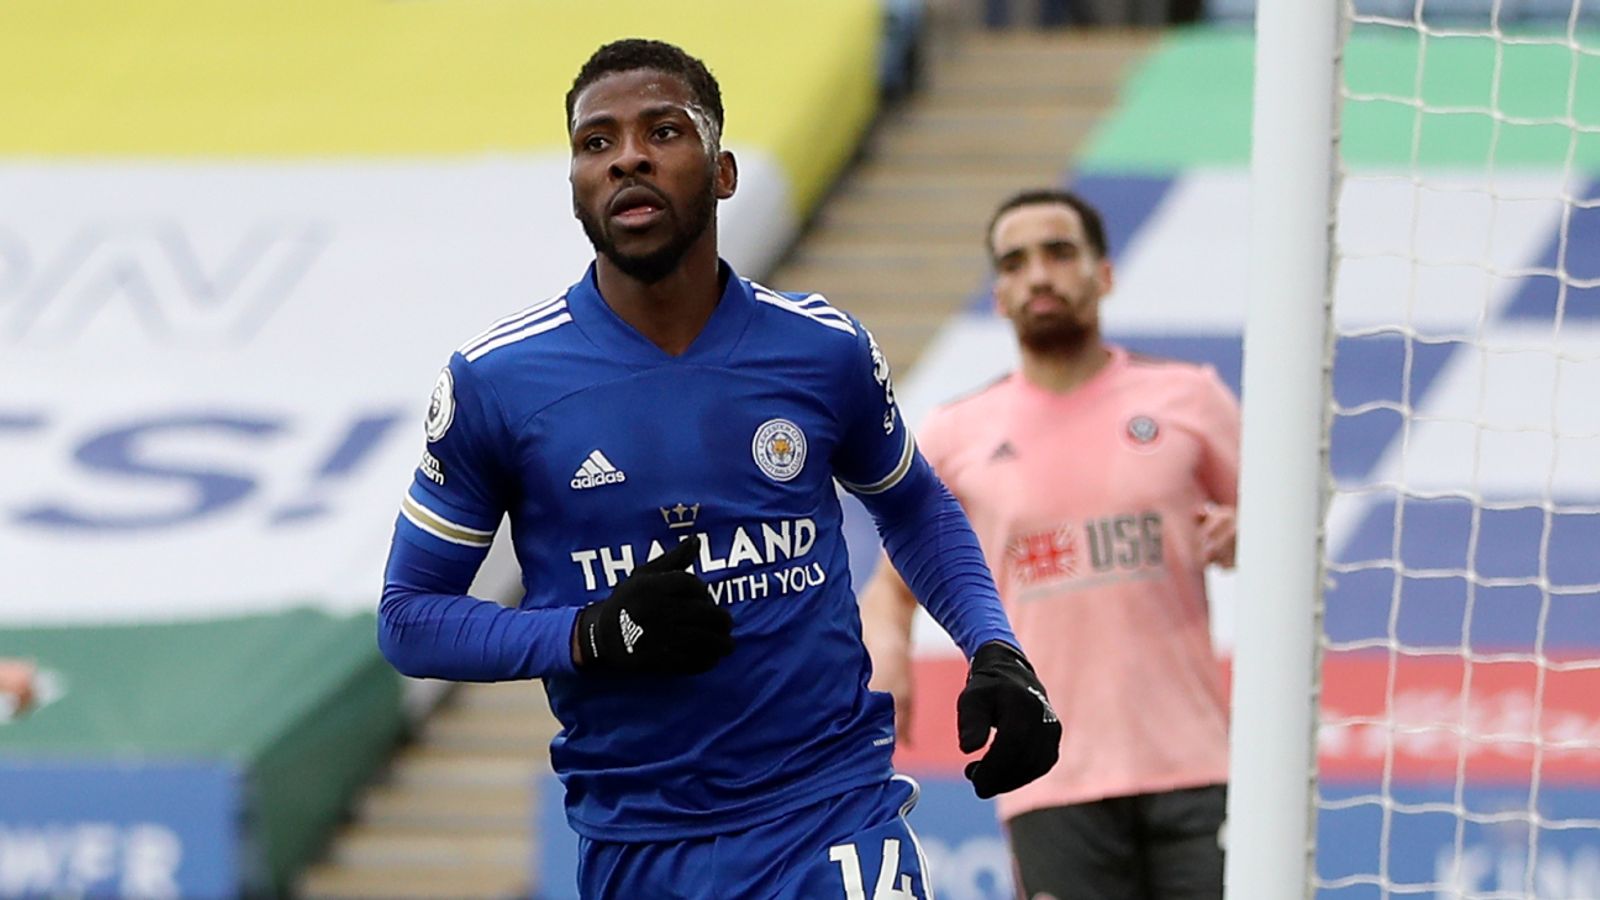  Kelechi Iheanacho is playing soccer for Leicester City wearing a blue jersey with black sleeves and black shorts while looking toward the goal.